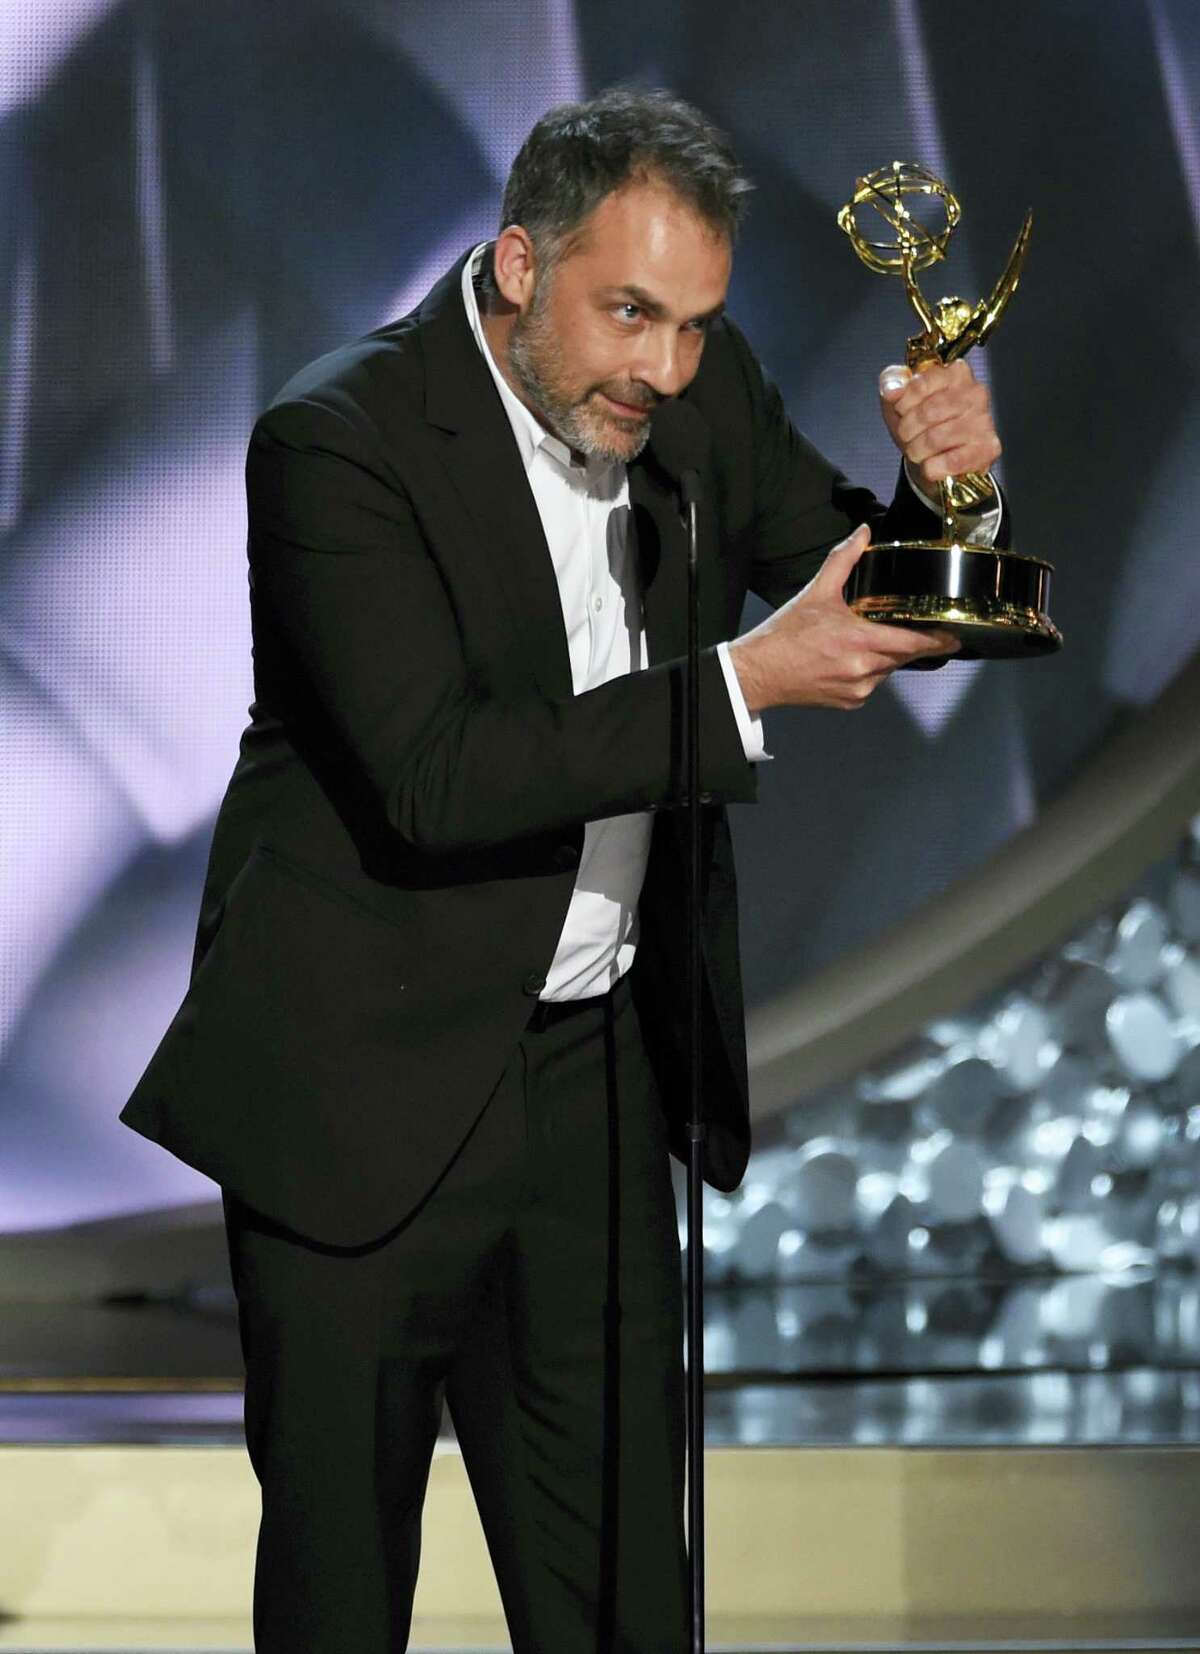 Miguel Sapochnik accepts the award for outstanding directing for a drama series for “Game of Thrones” at the 68th Primetime Emmy Awards on Sunday, Sept. 18, 2016, at the Microsoft Theater in Los Angeles.